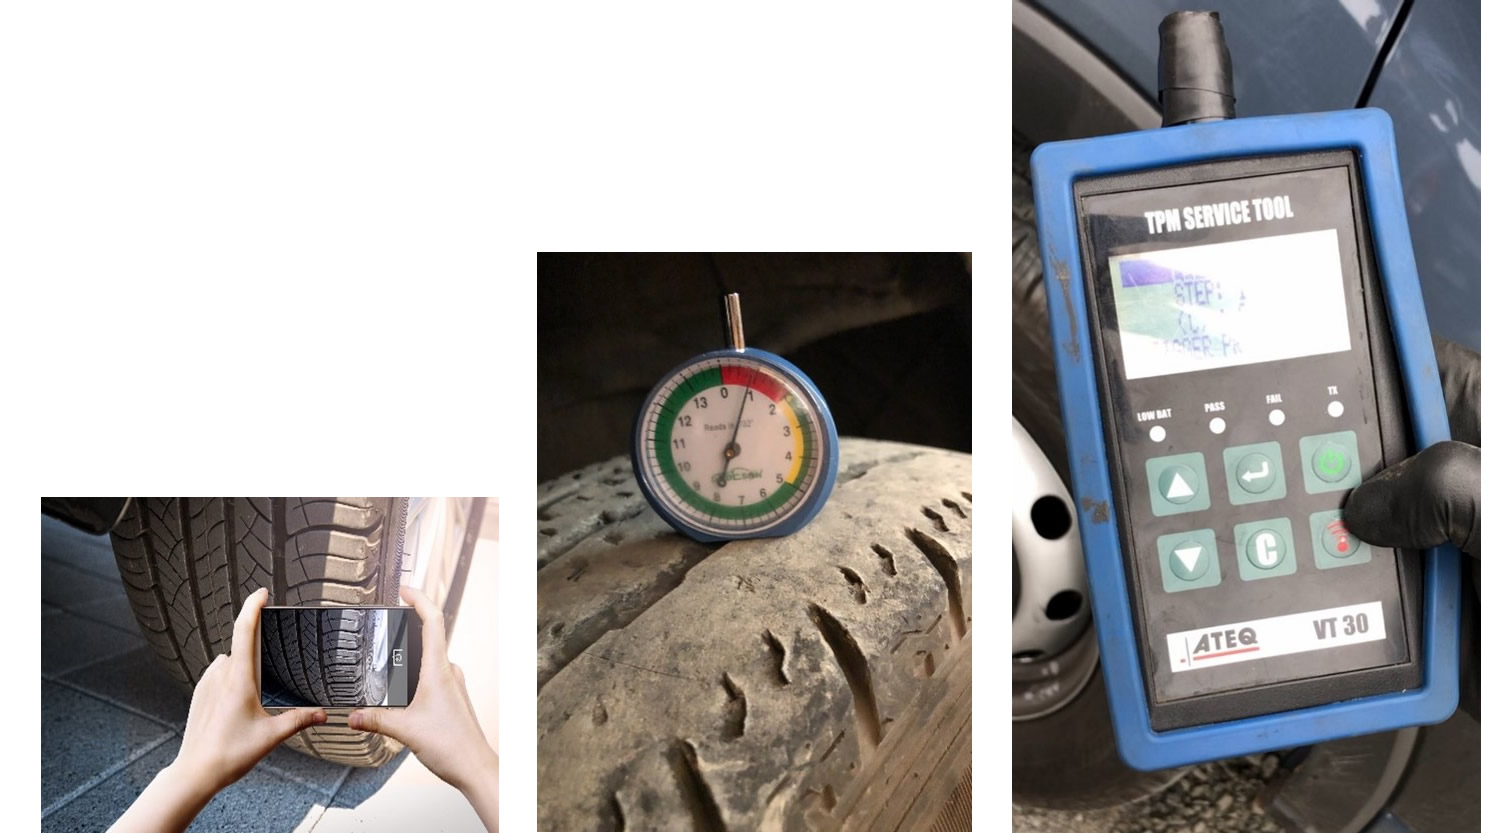 A picture of a tire gauge and a hand holding it.